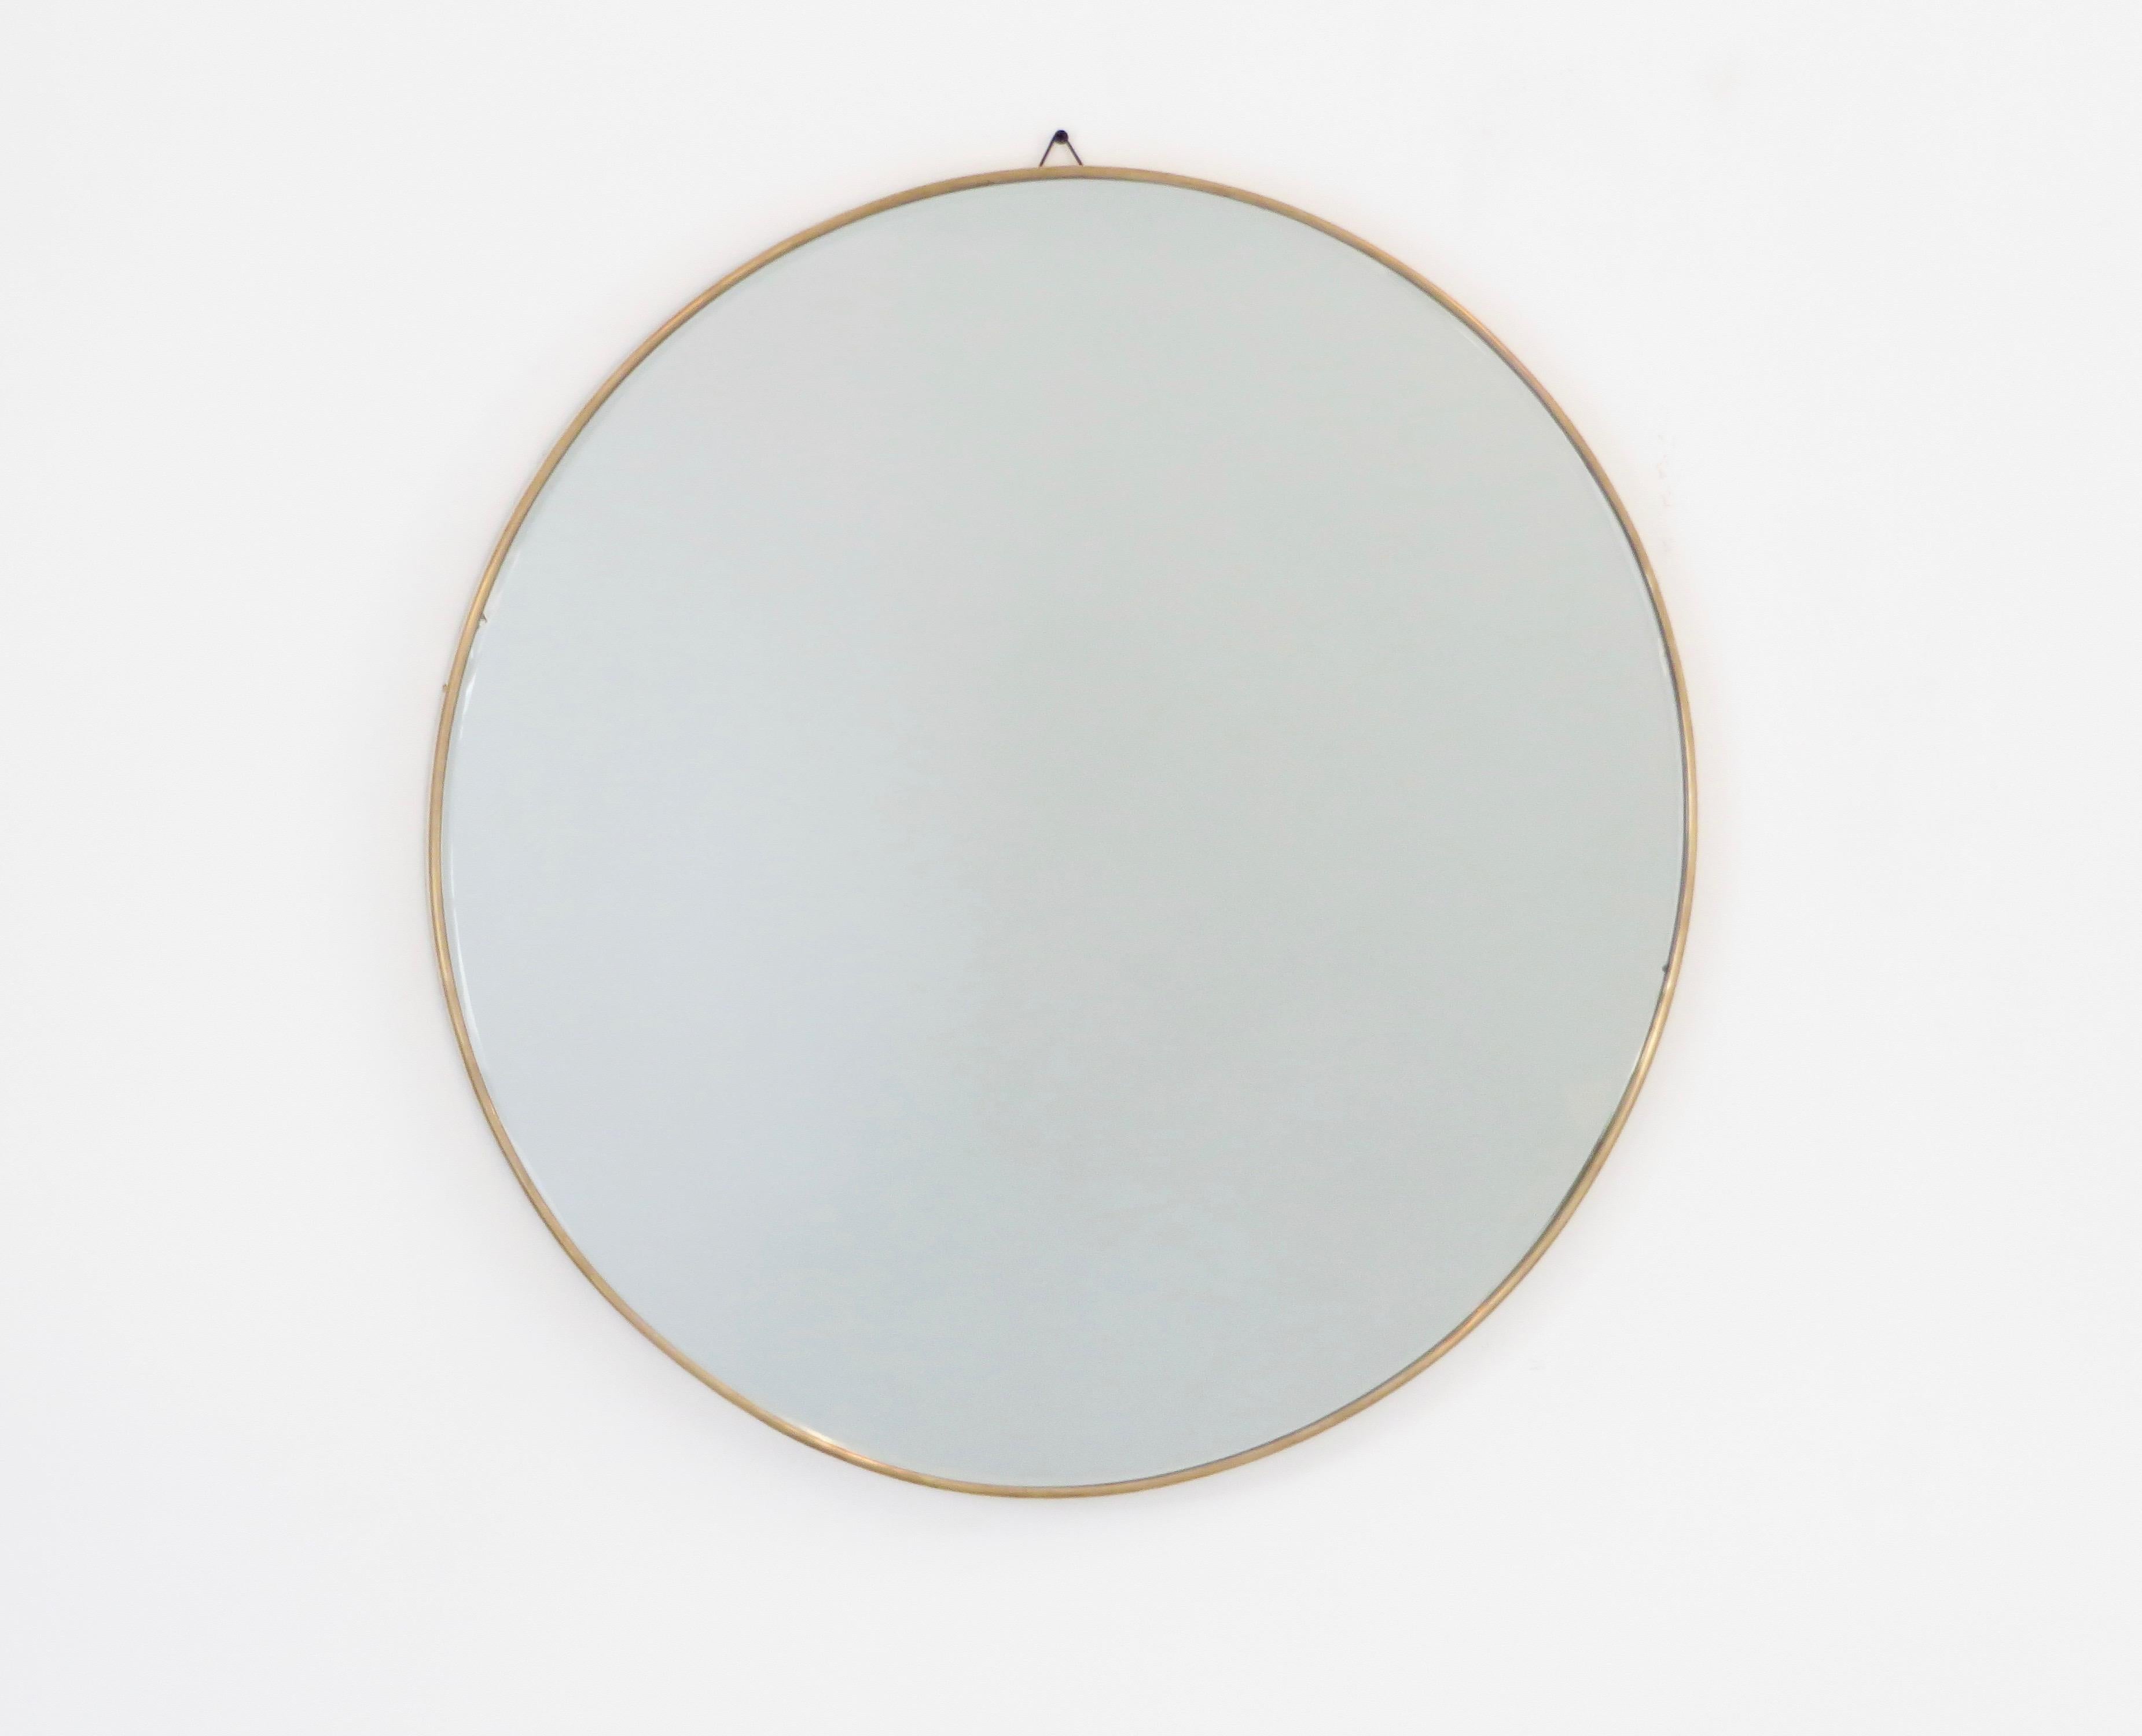 A round Italian vintage brass framed mirror with beautiful patina and no flaws to the original mirror, circa 1950. 
The mirror has a .25 